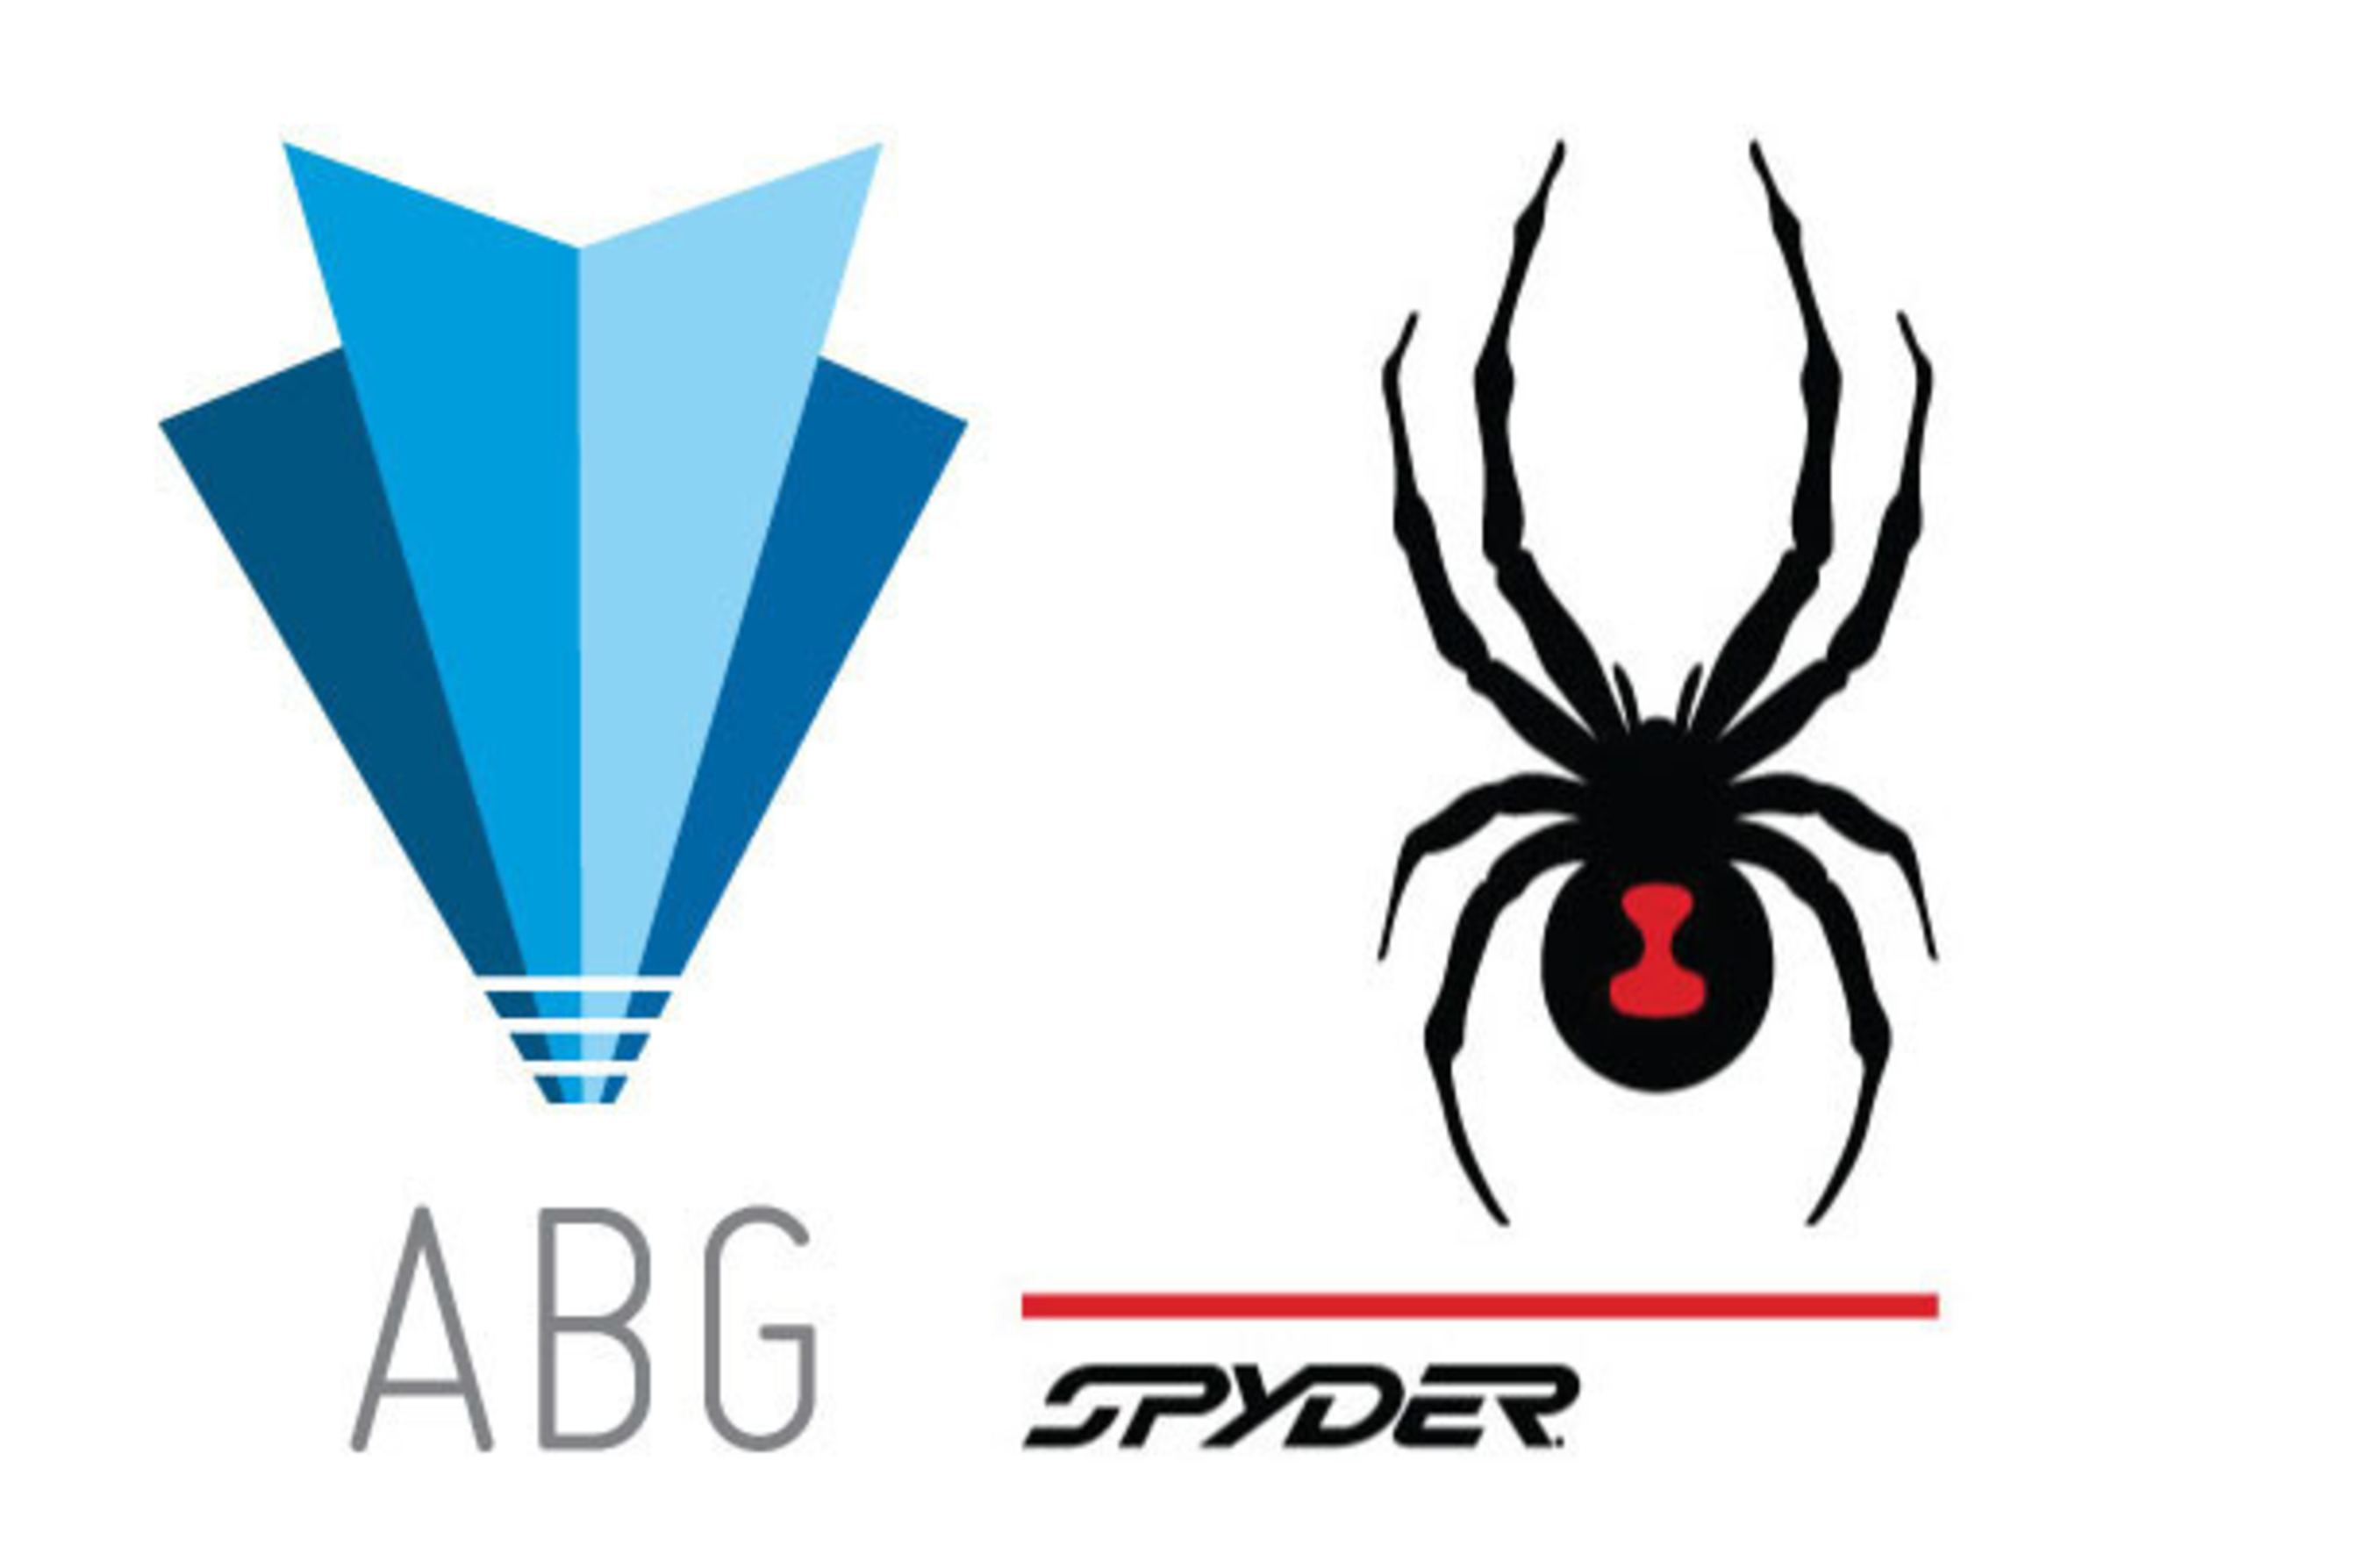 About the Brand: Spyder